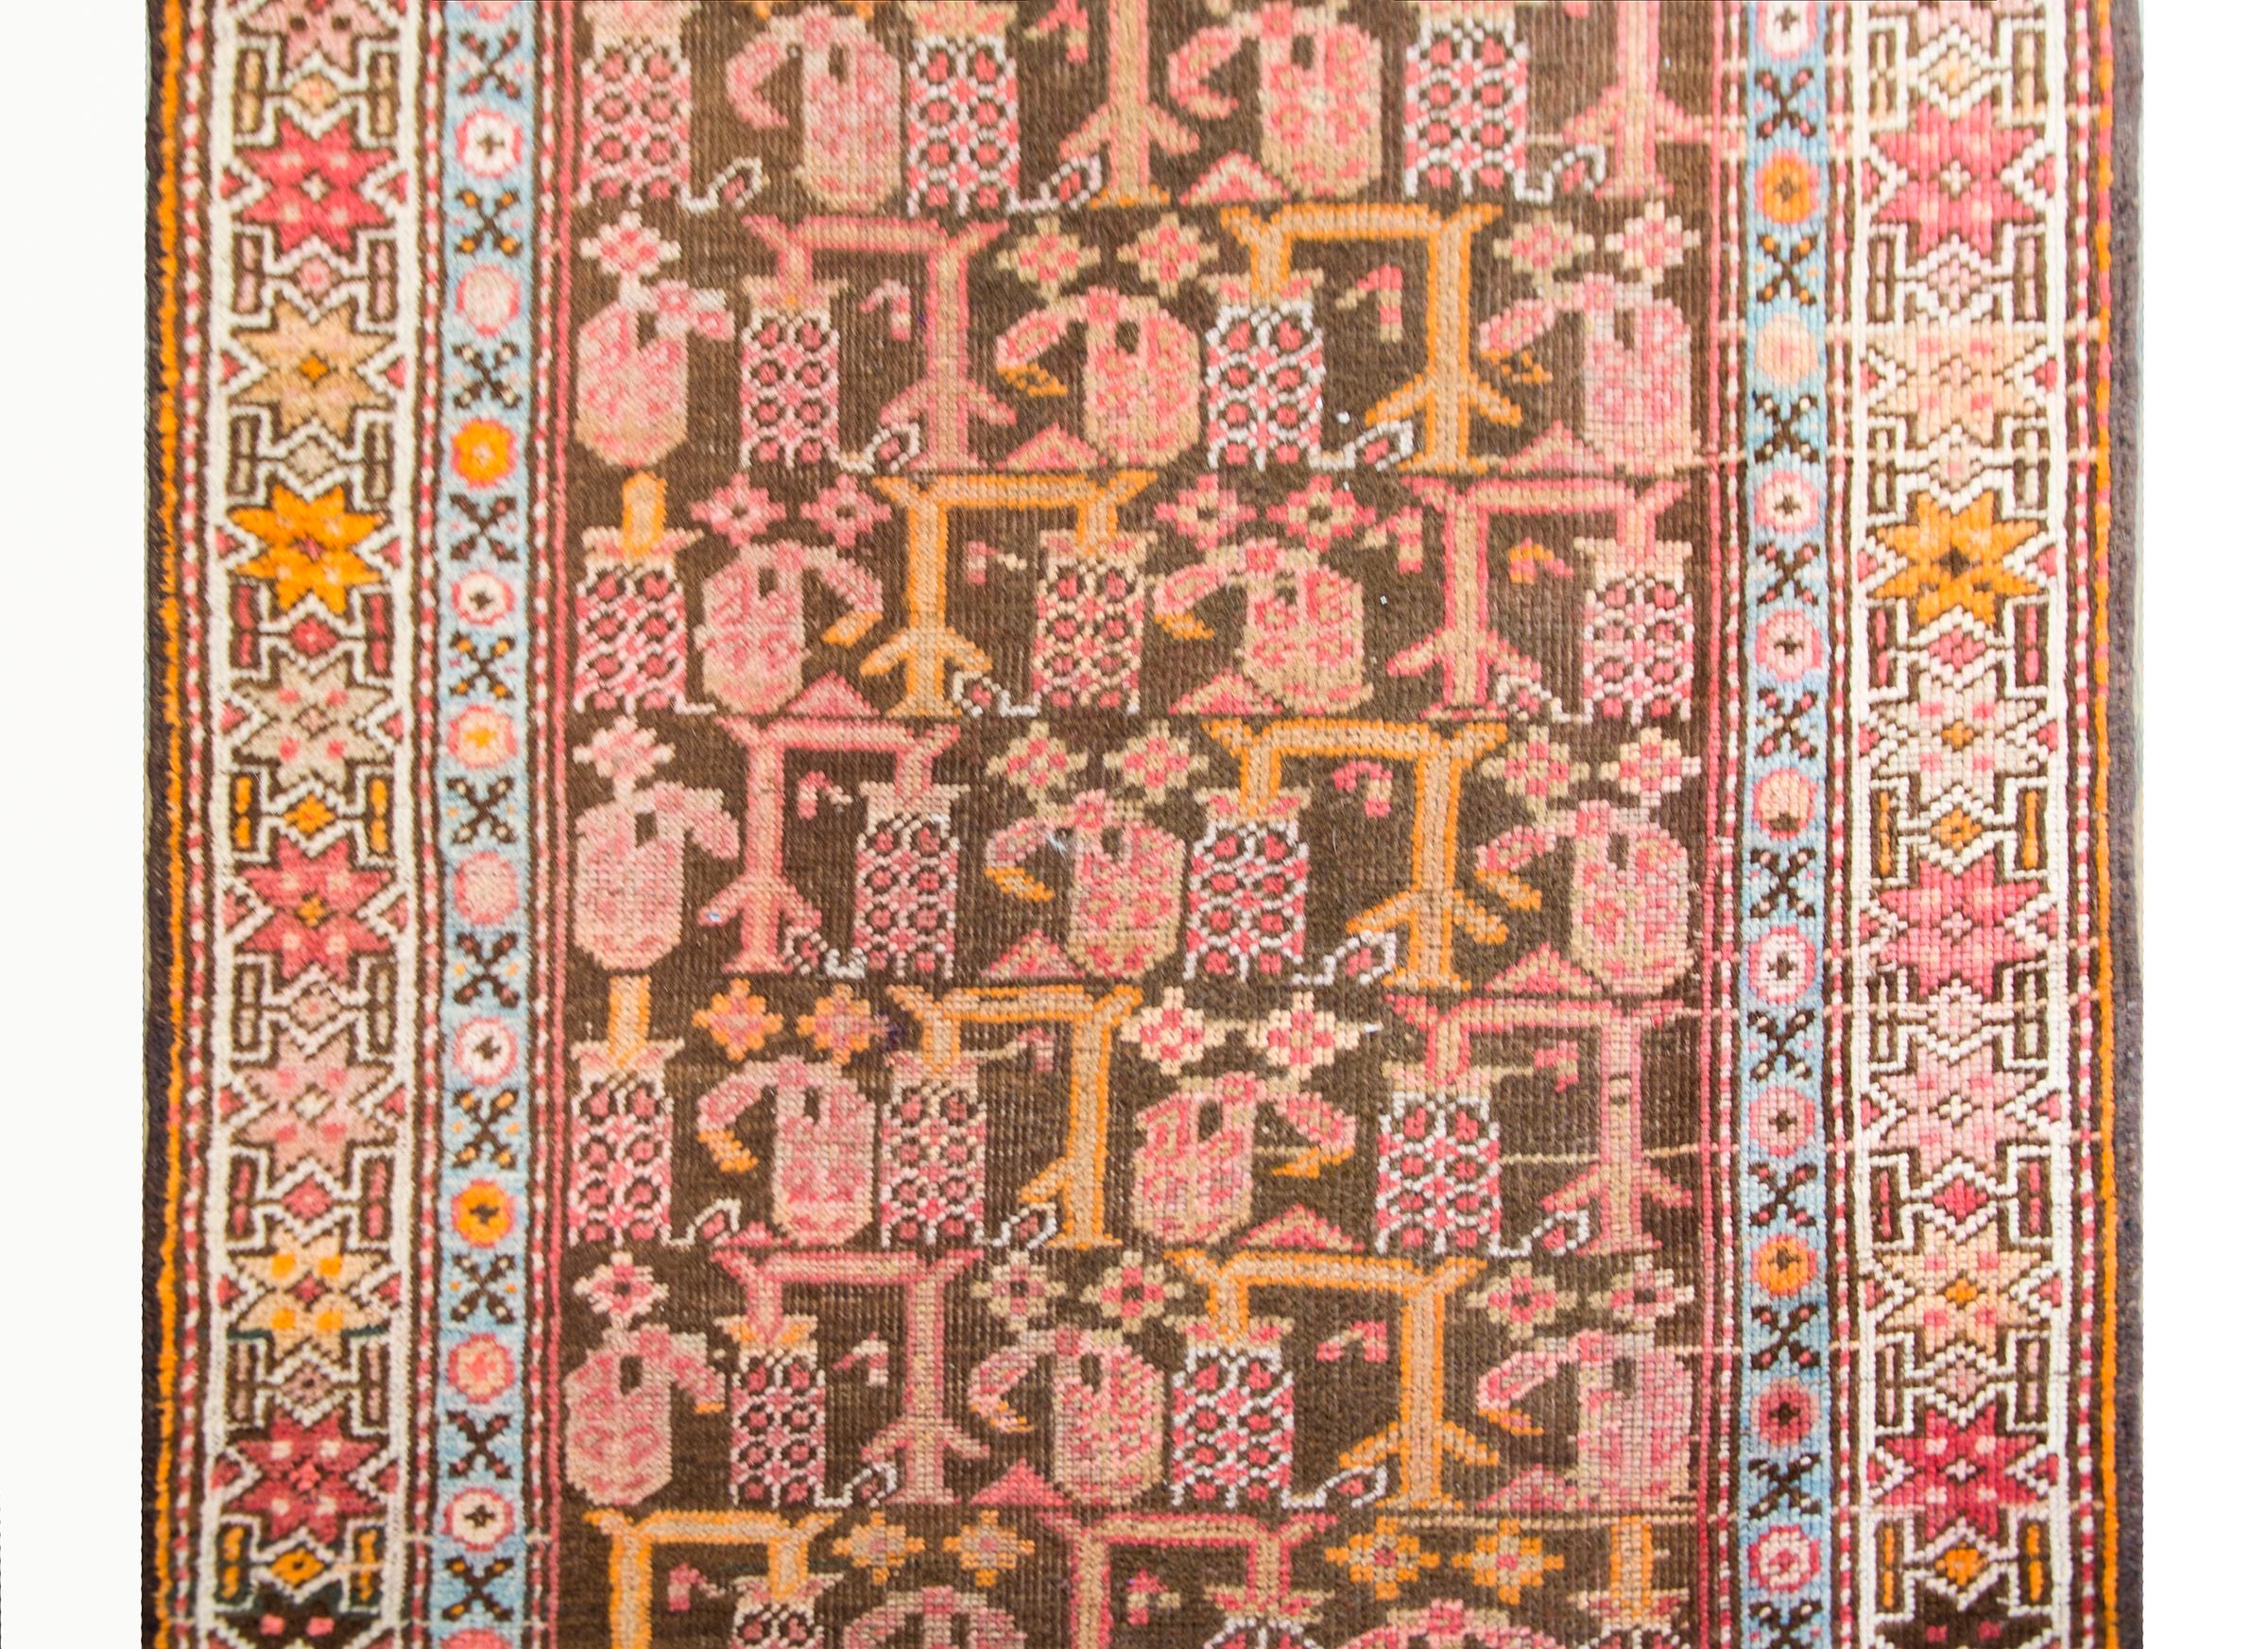 A wonderful early 20th century Persian Kurdish runner with an incredible all-over abrash stylized floral pattern containing myriad trees with flowers surrounded by even more stylized flowers and petite geometric patterned stripes, and all woven in